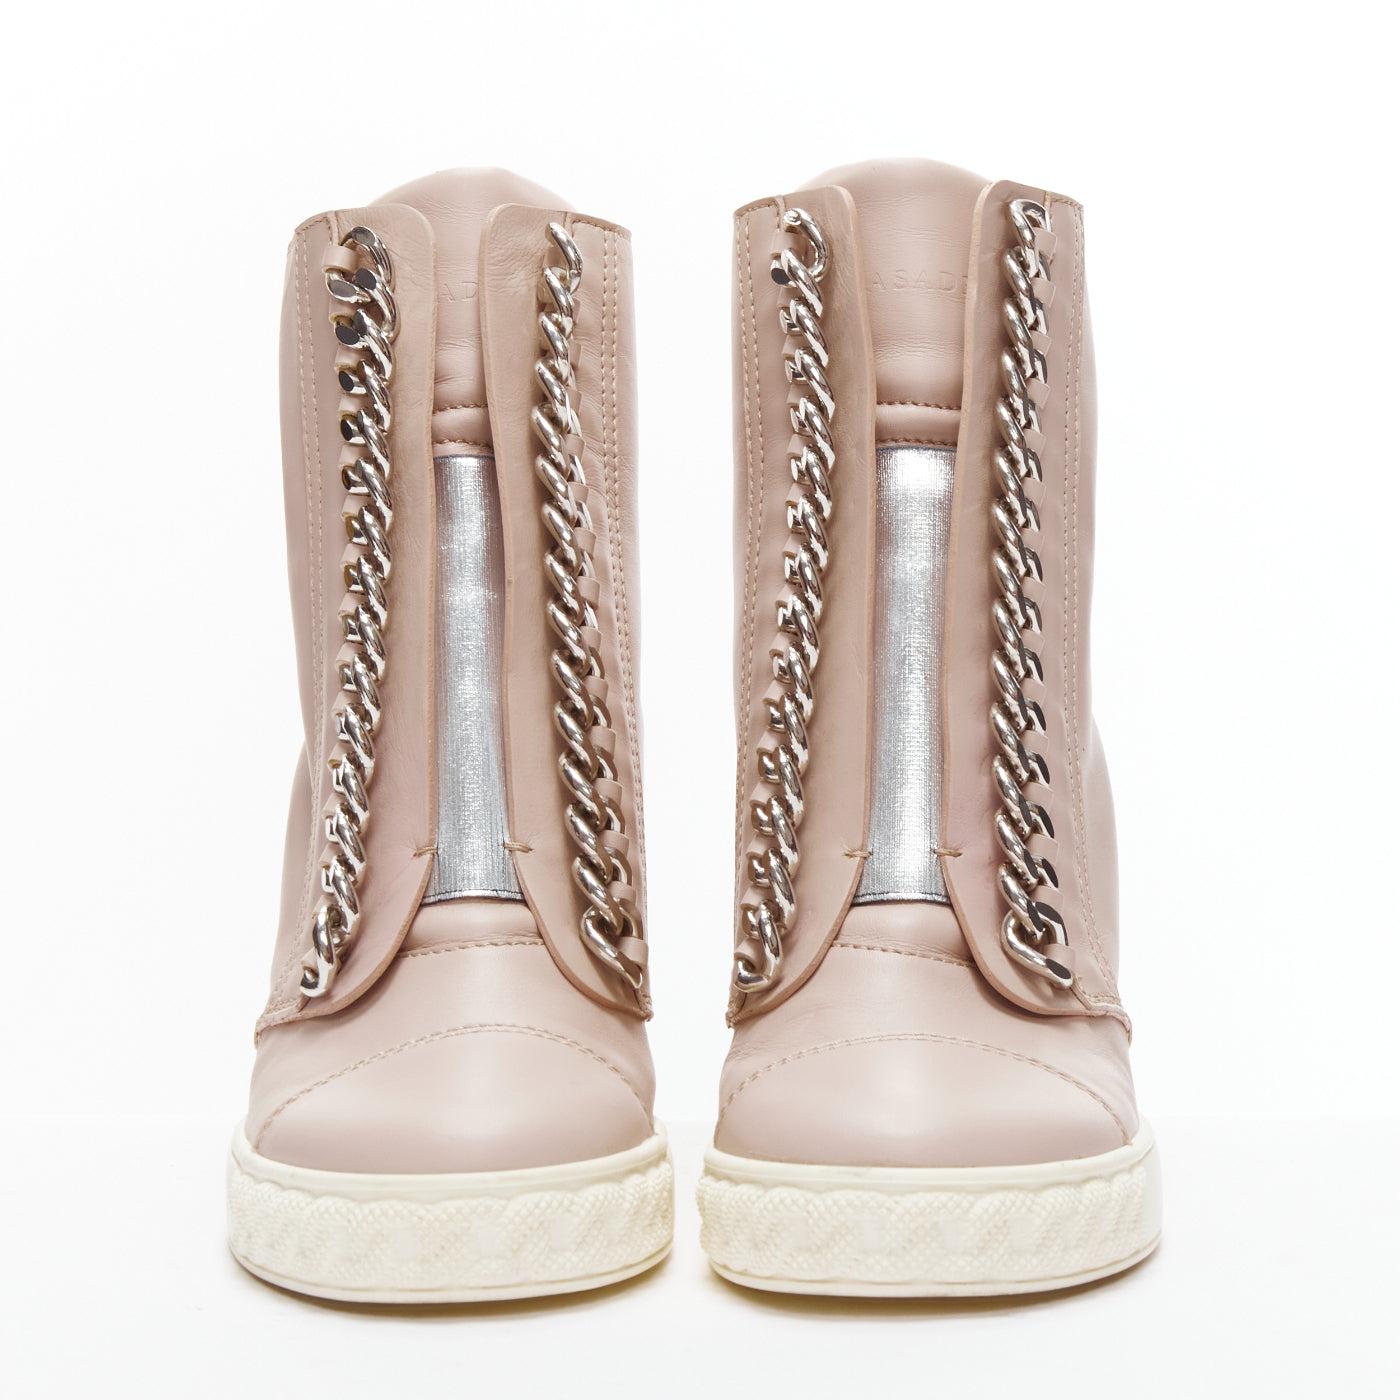 Beige CASADEI pink leather silver chain trim ankle wedge sneakers EU39.5 For Sale